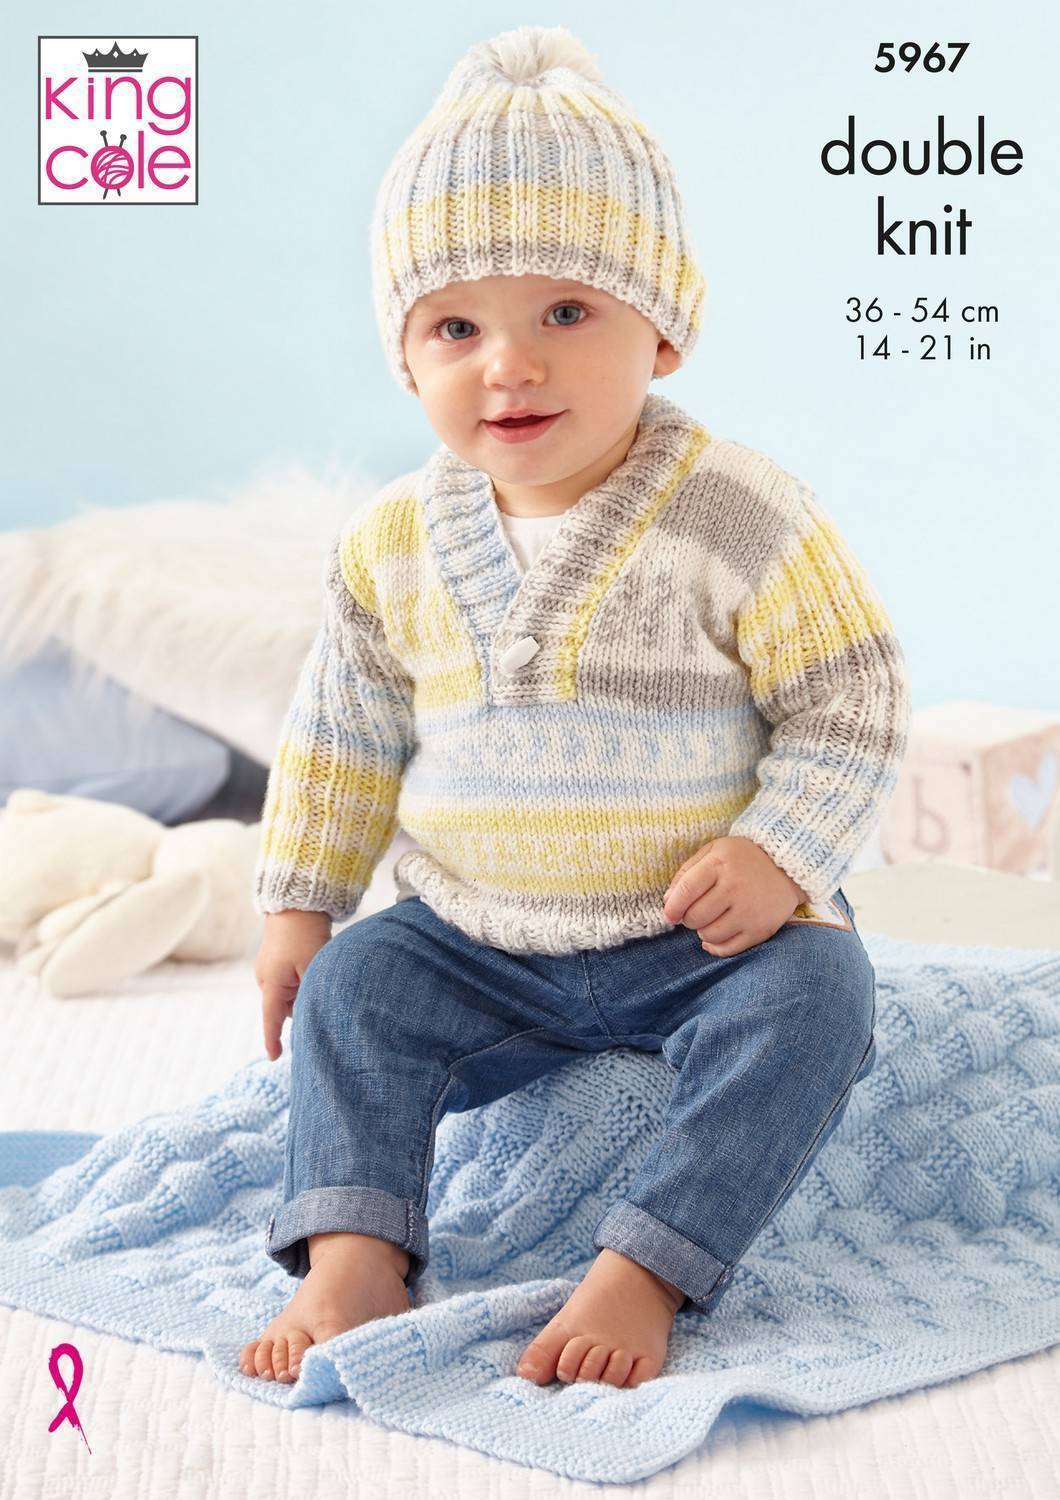 Sweater, Cardigan, Hat and Blanket knitted in King Cole Cherish DK and ...